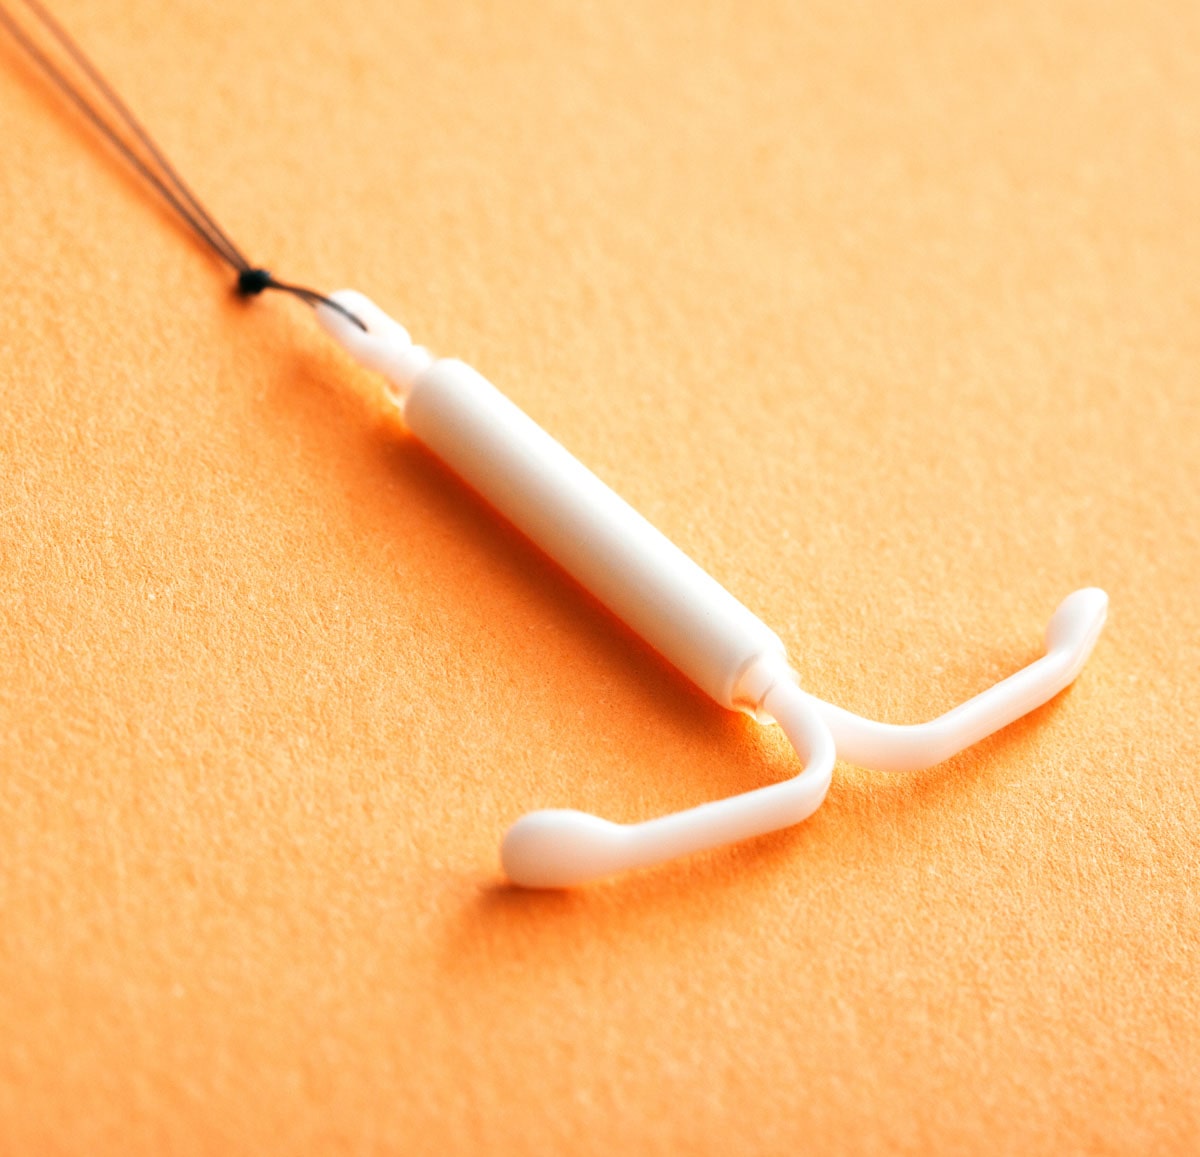 Advice before fitting an intrauterine system or intrauterine device